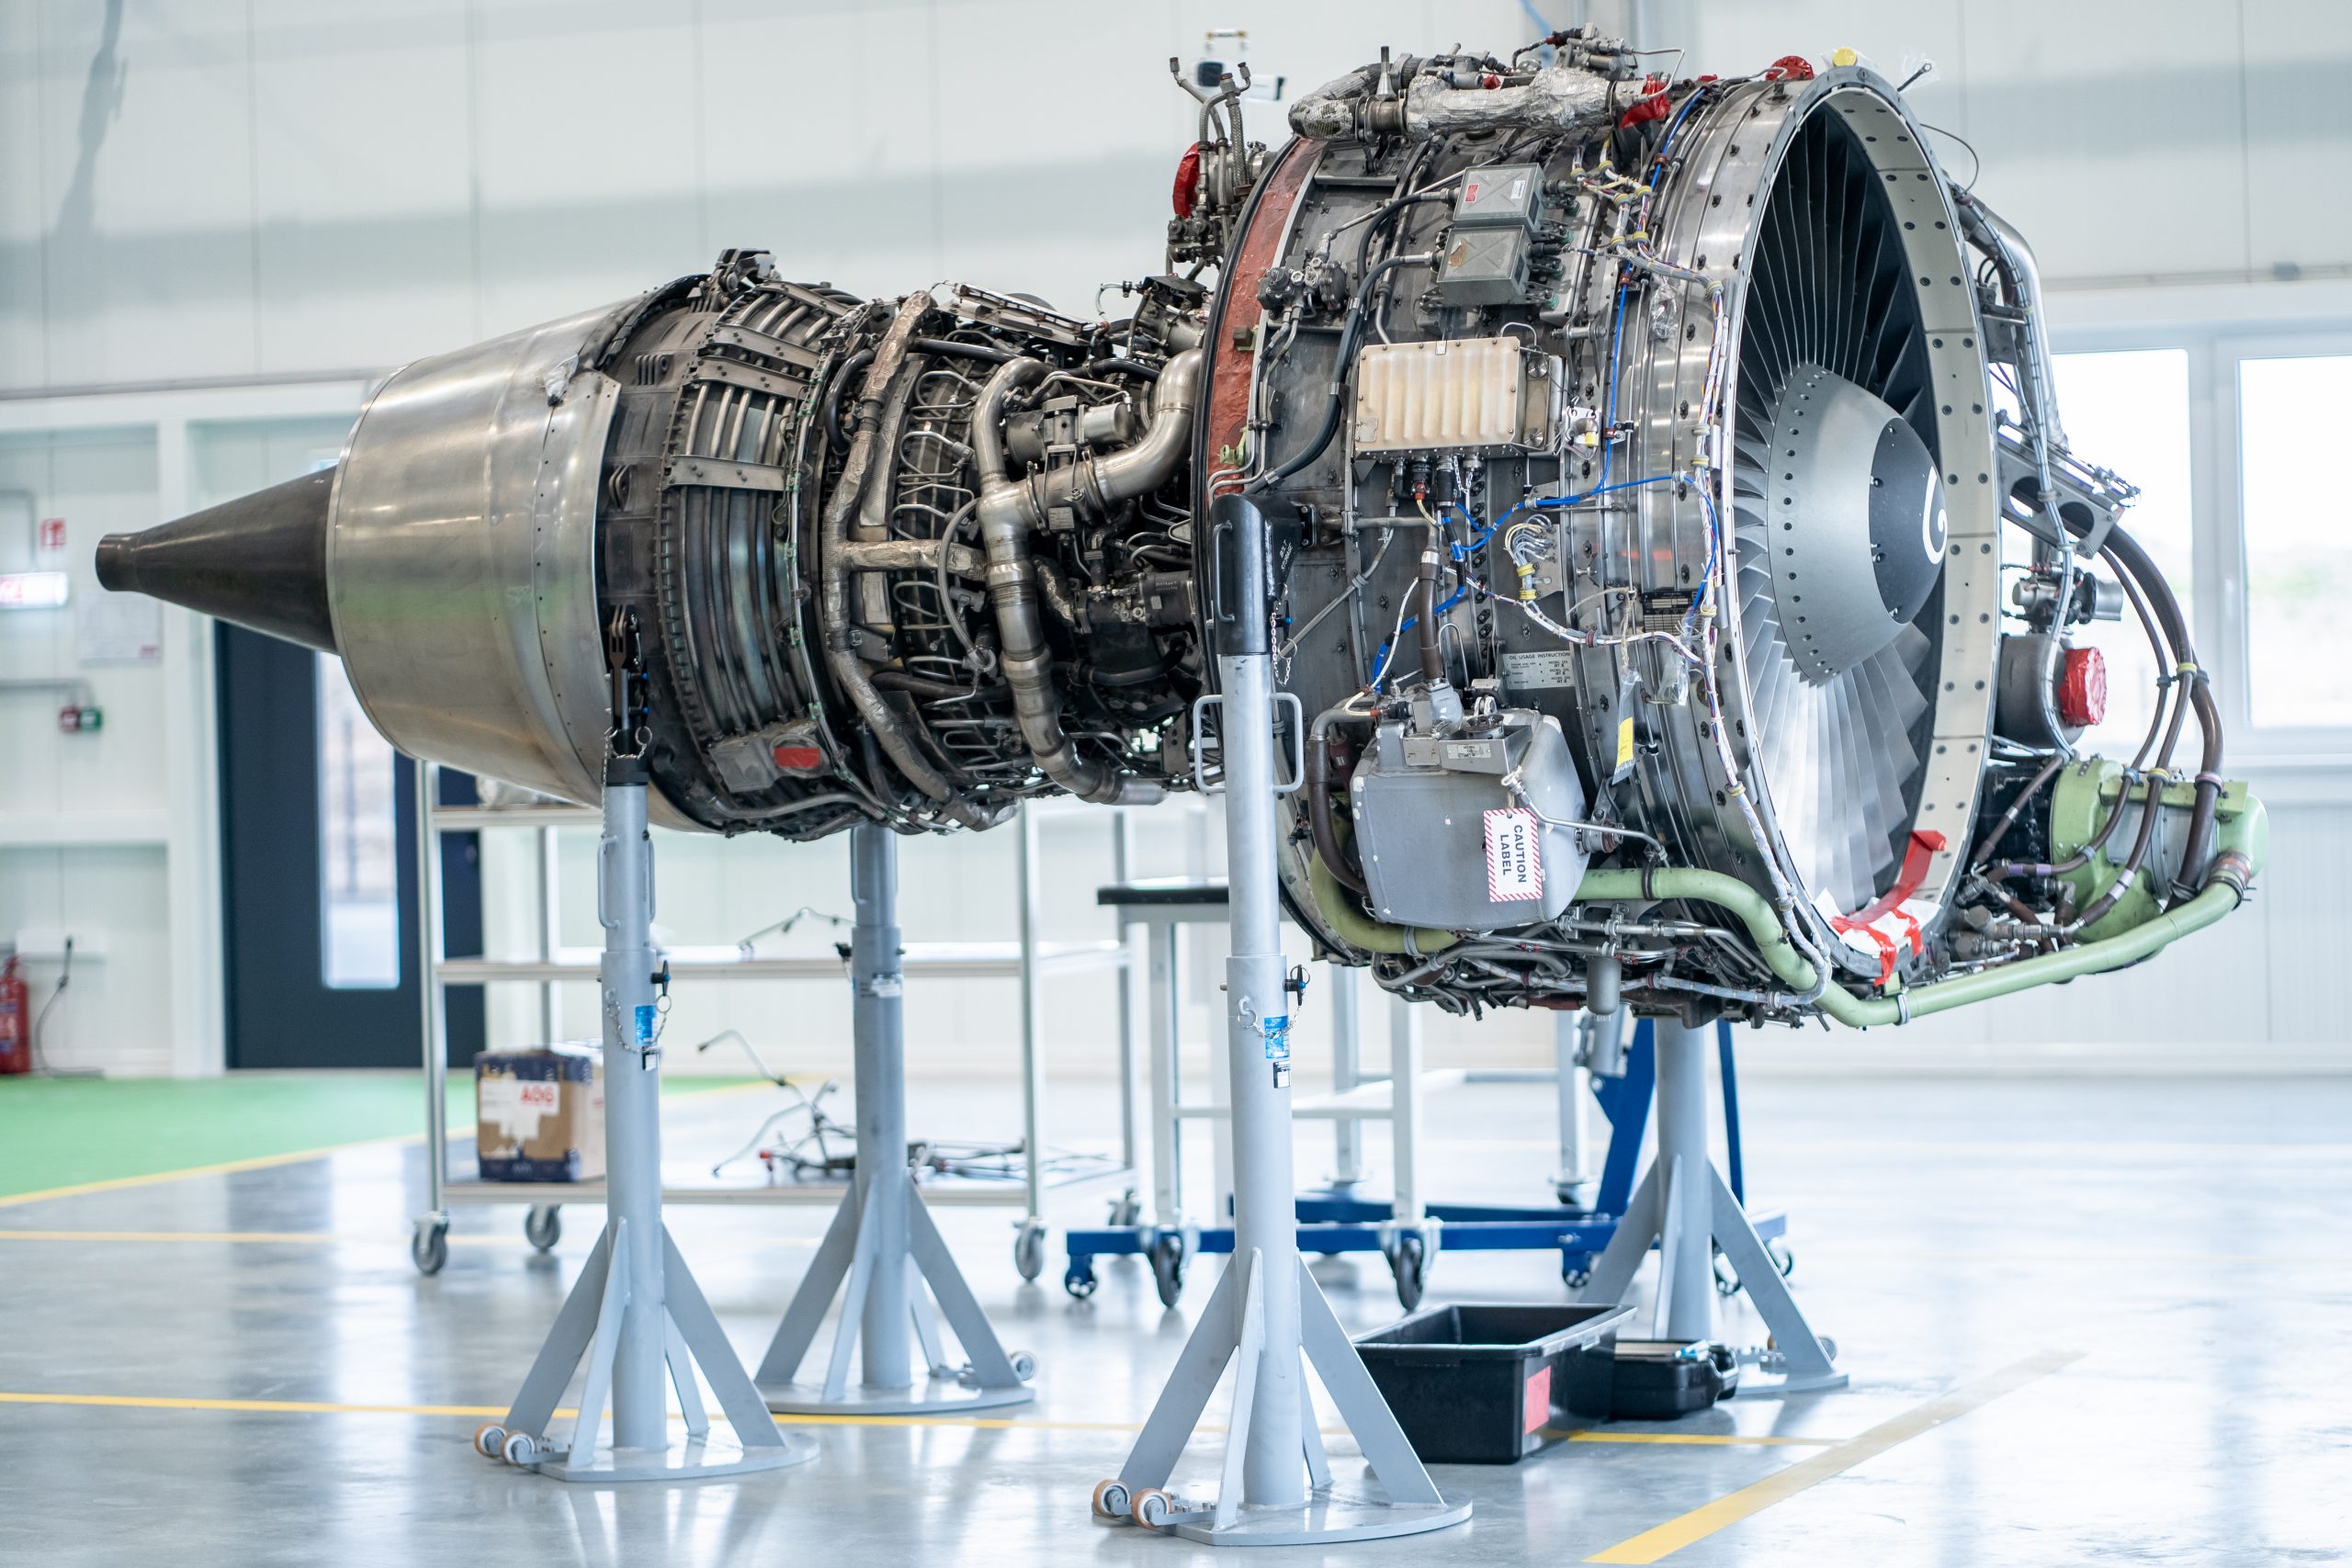 New FAA-approved repair station in Europe – FL Technics received aircraft engines shop certification